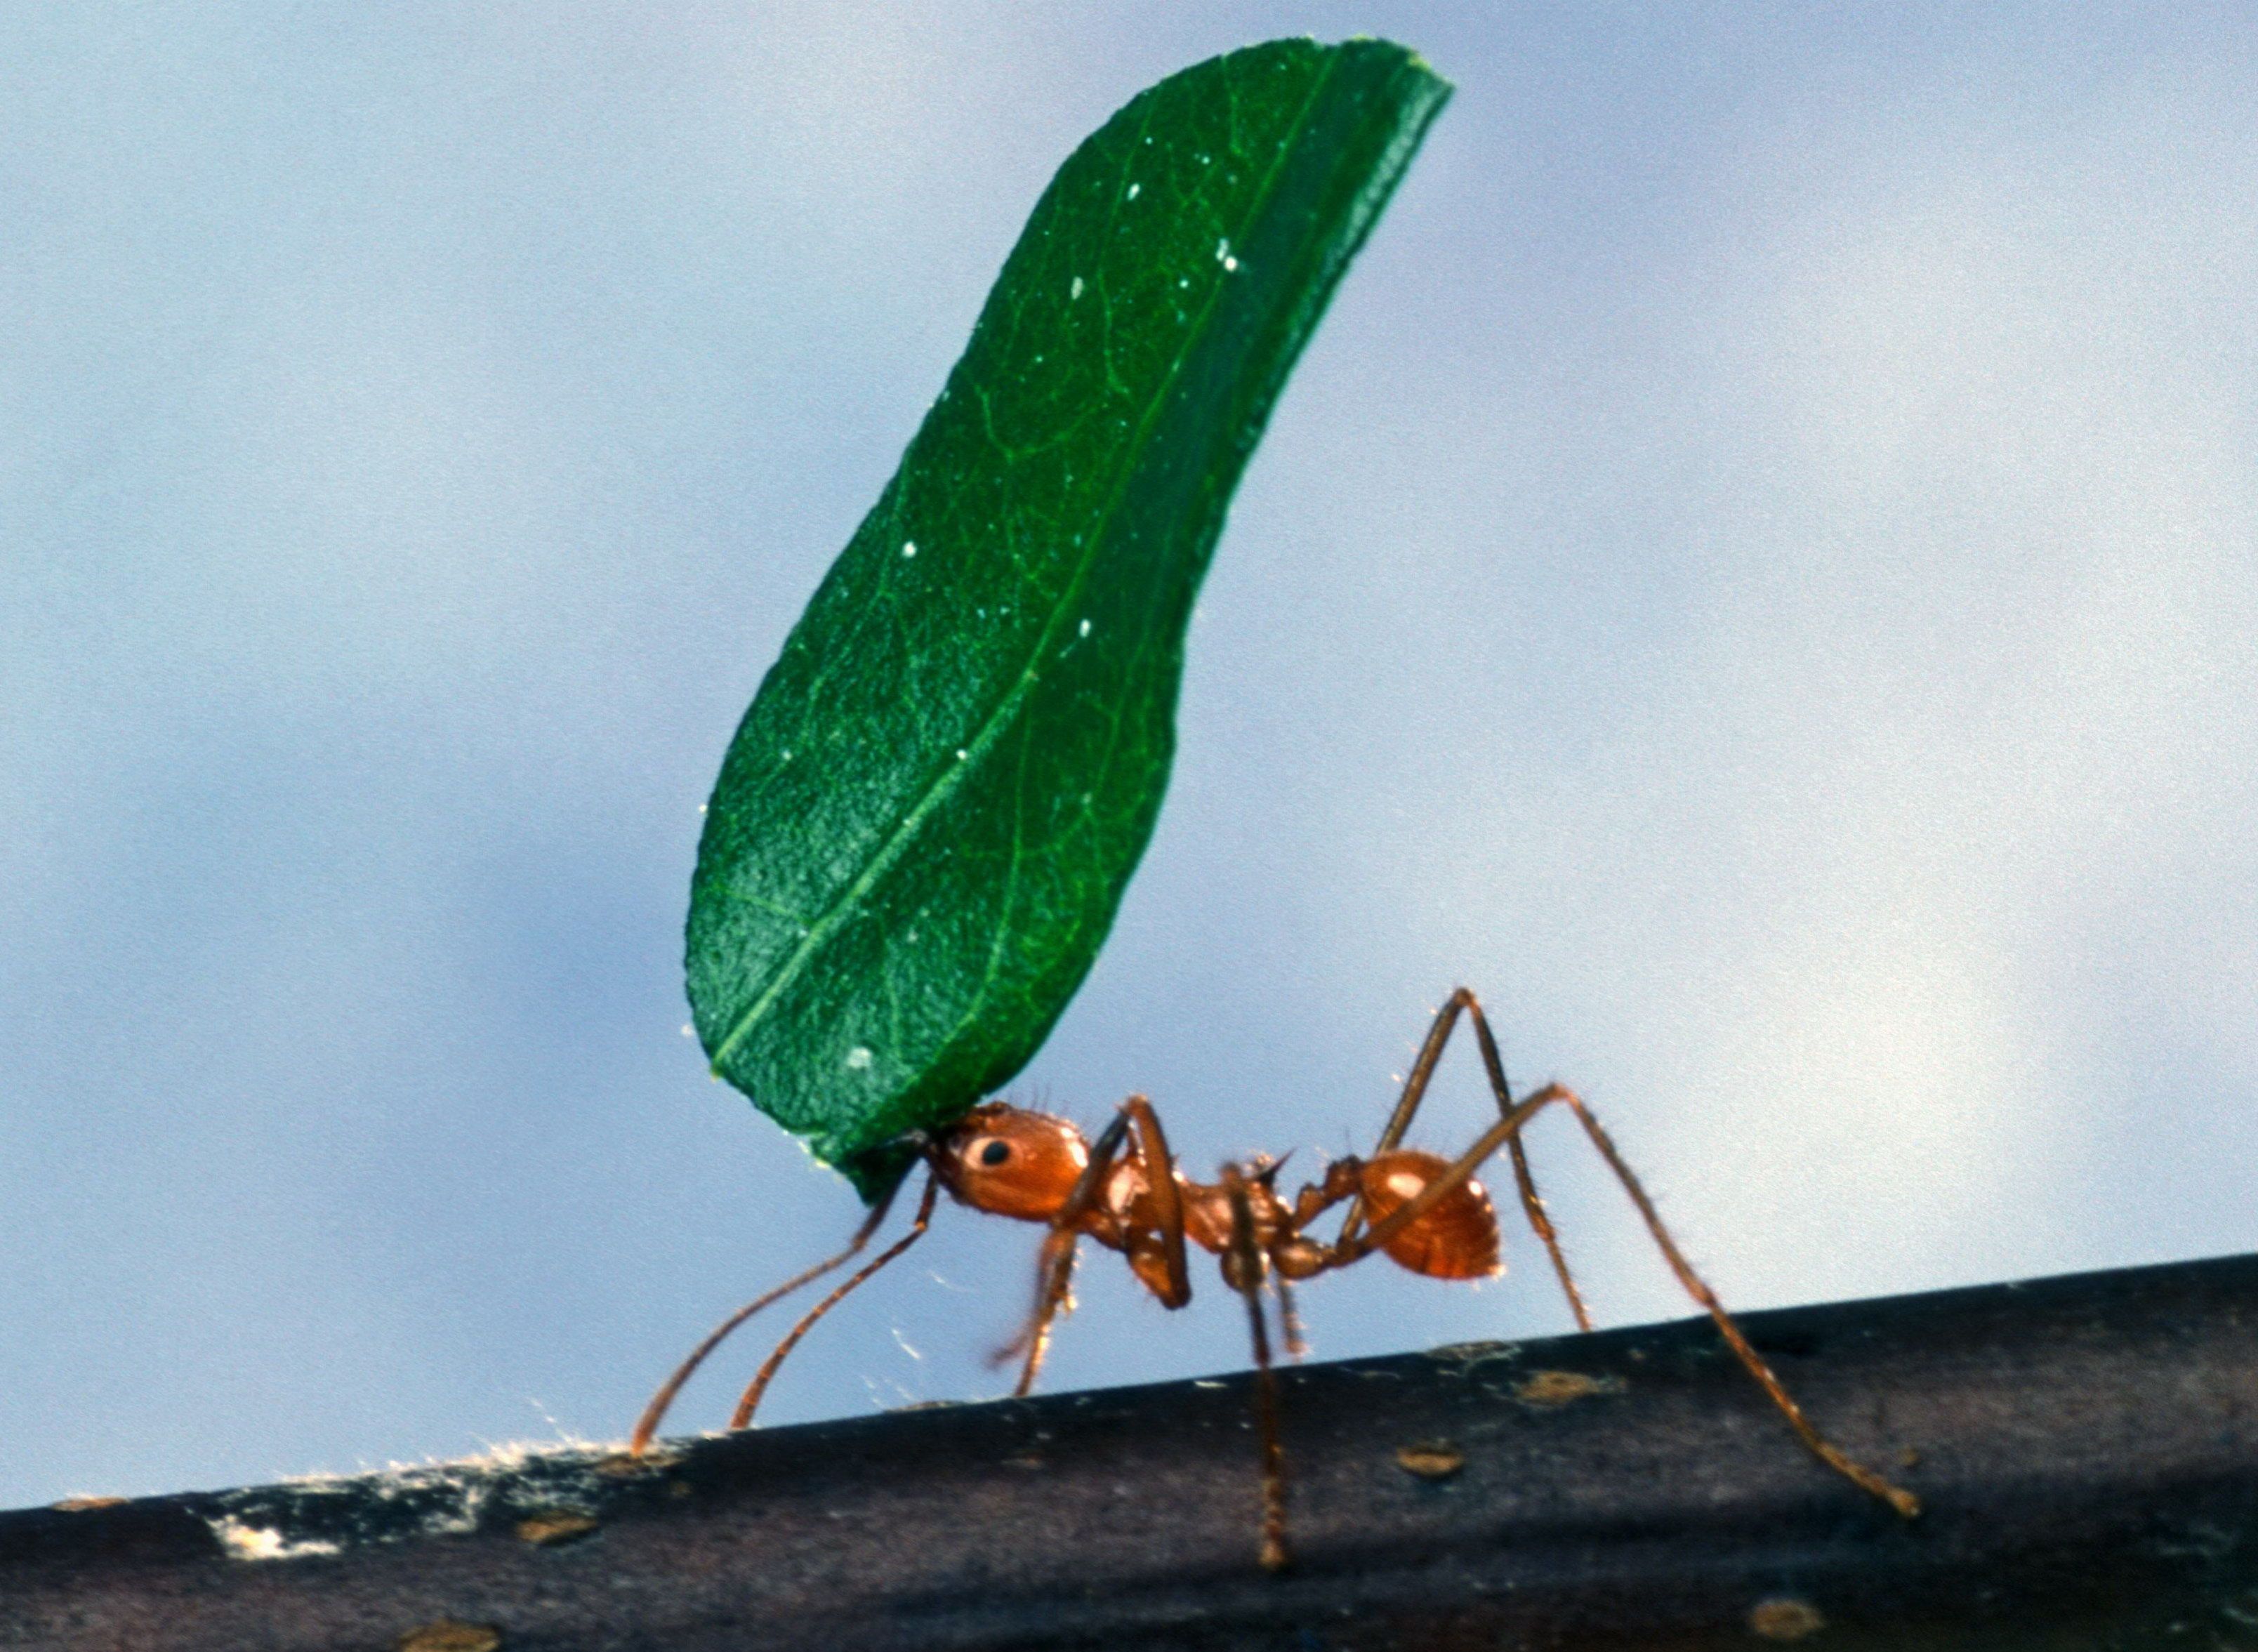 A worker ant carrying a leaf